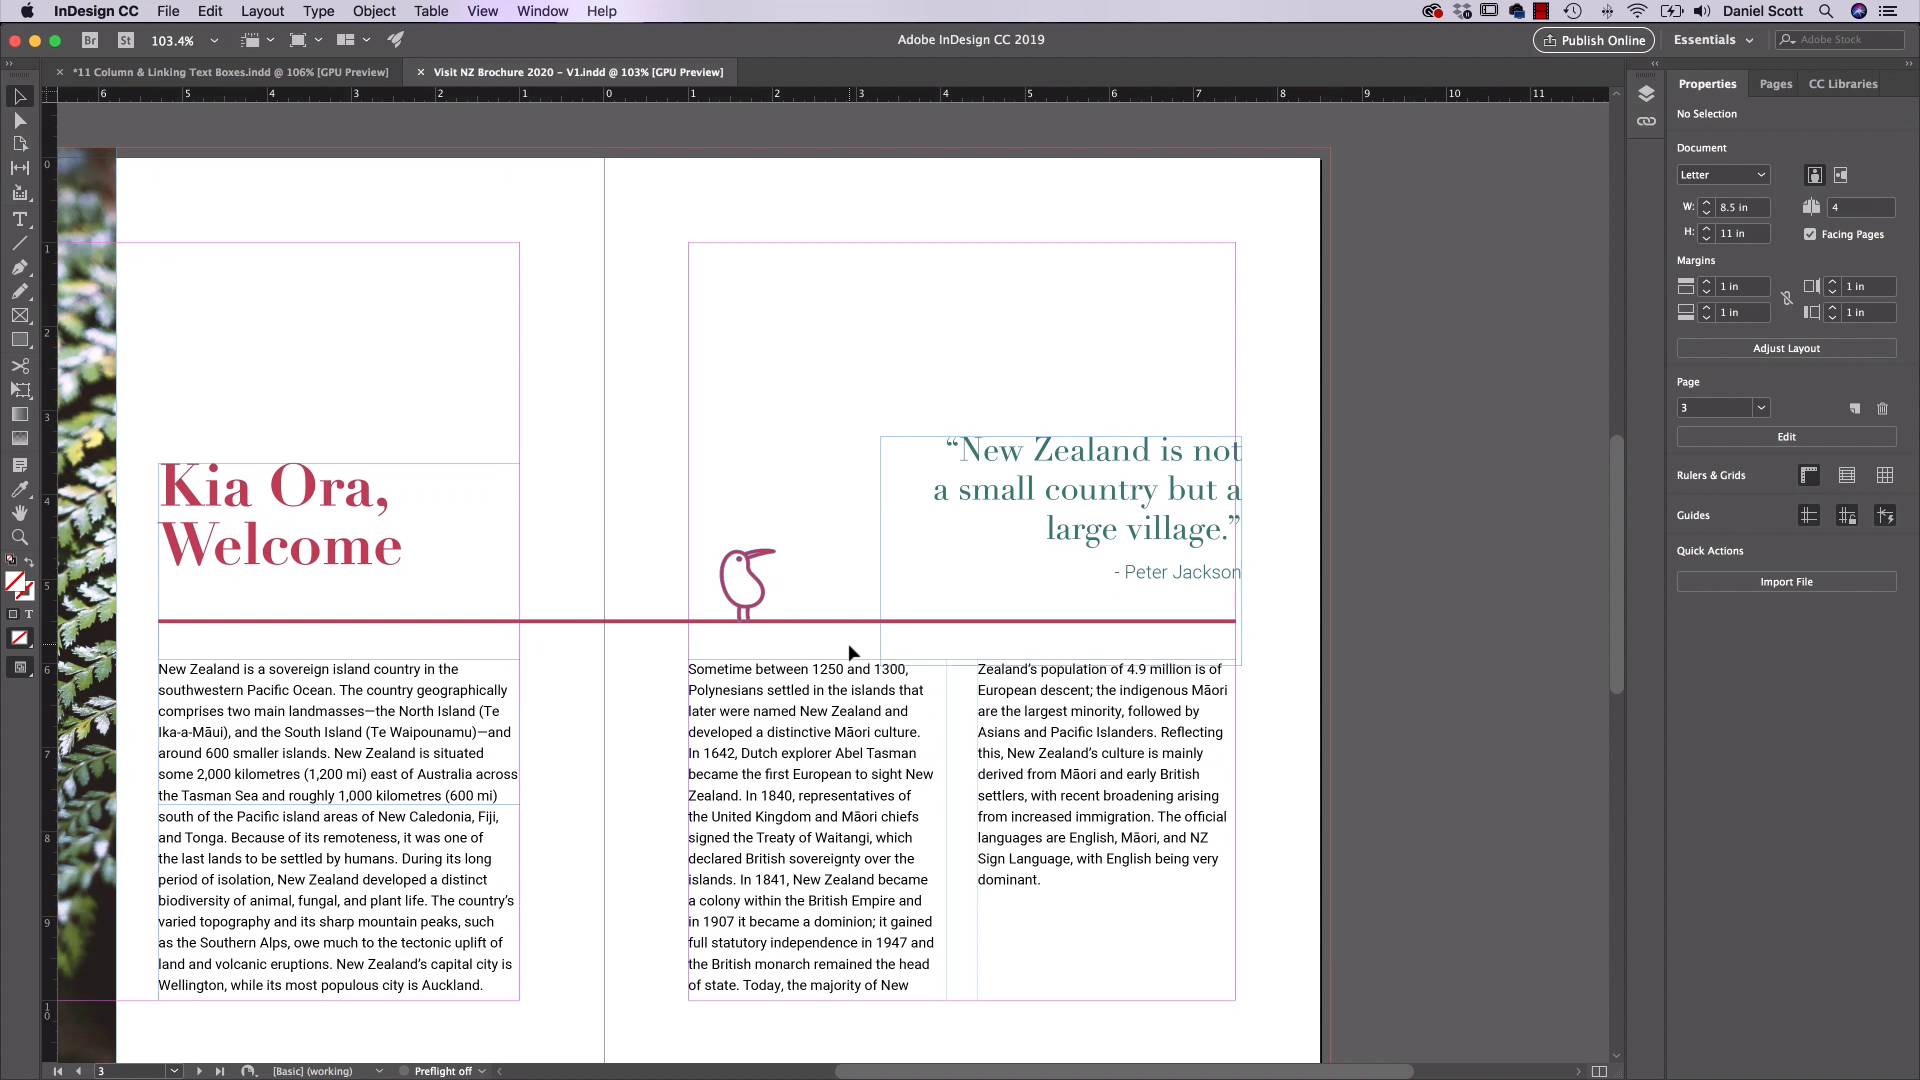 learning adobe indesign